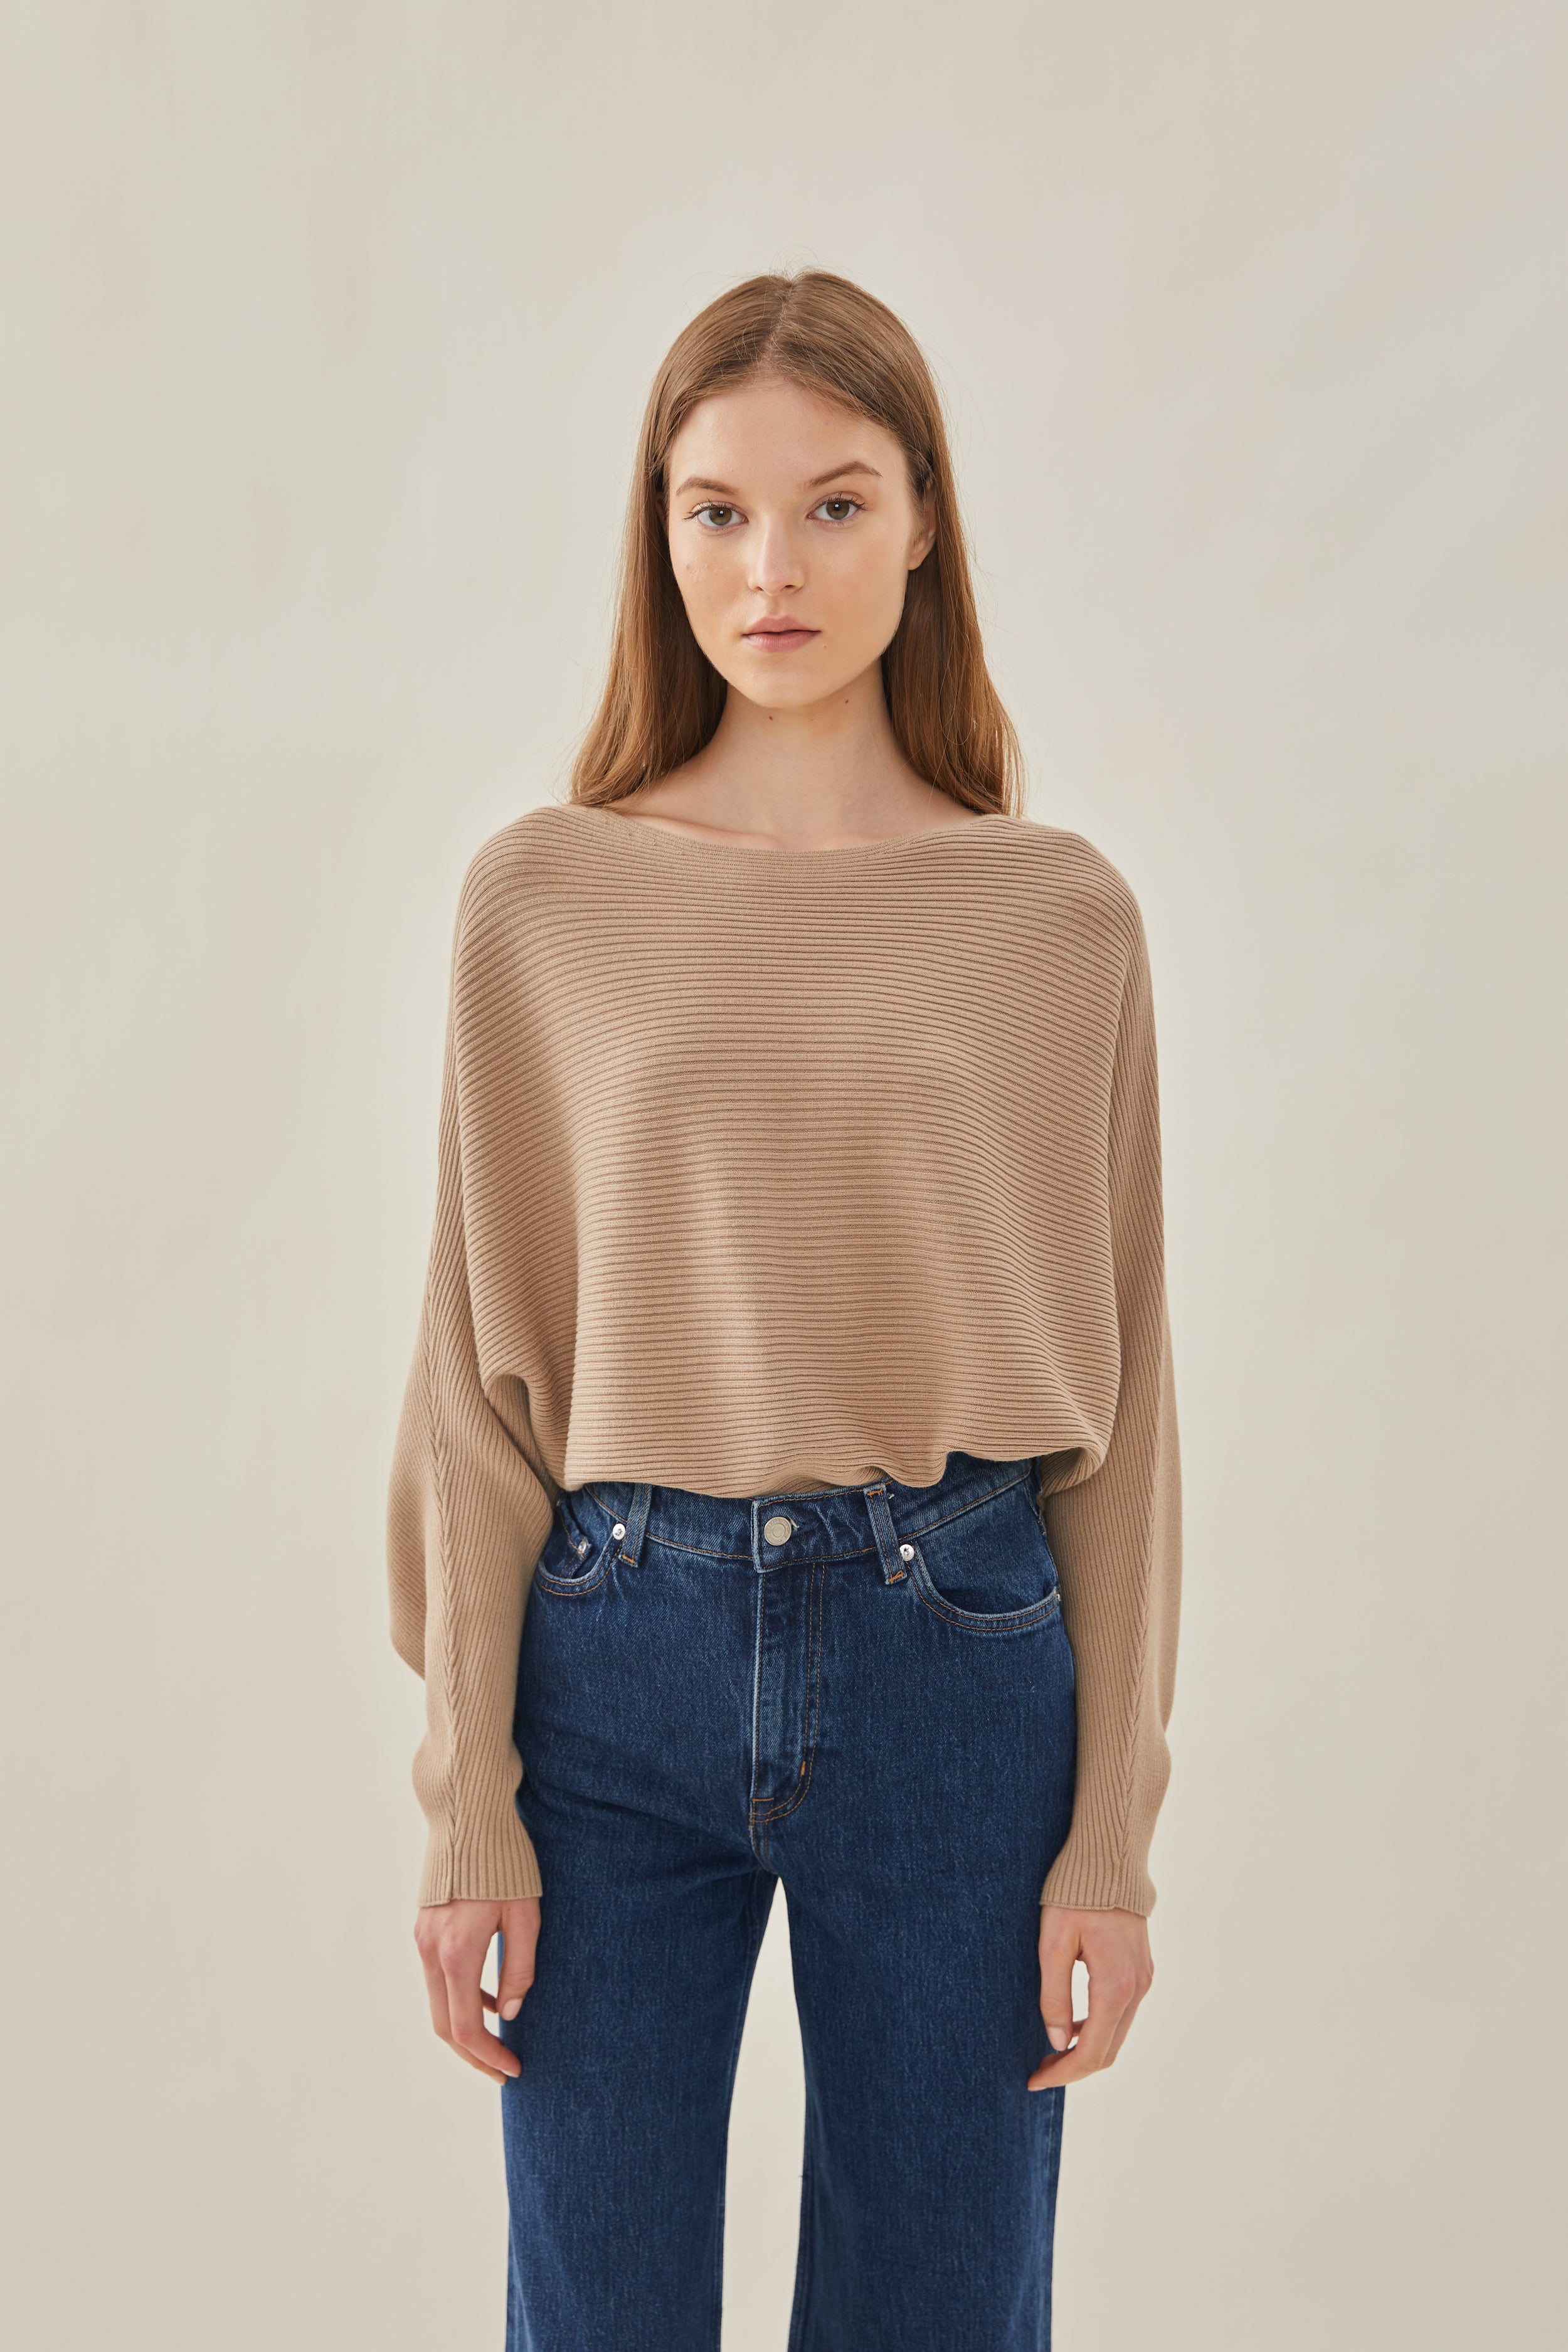 Boat Neck Knitted Top in Hay